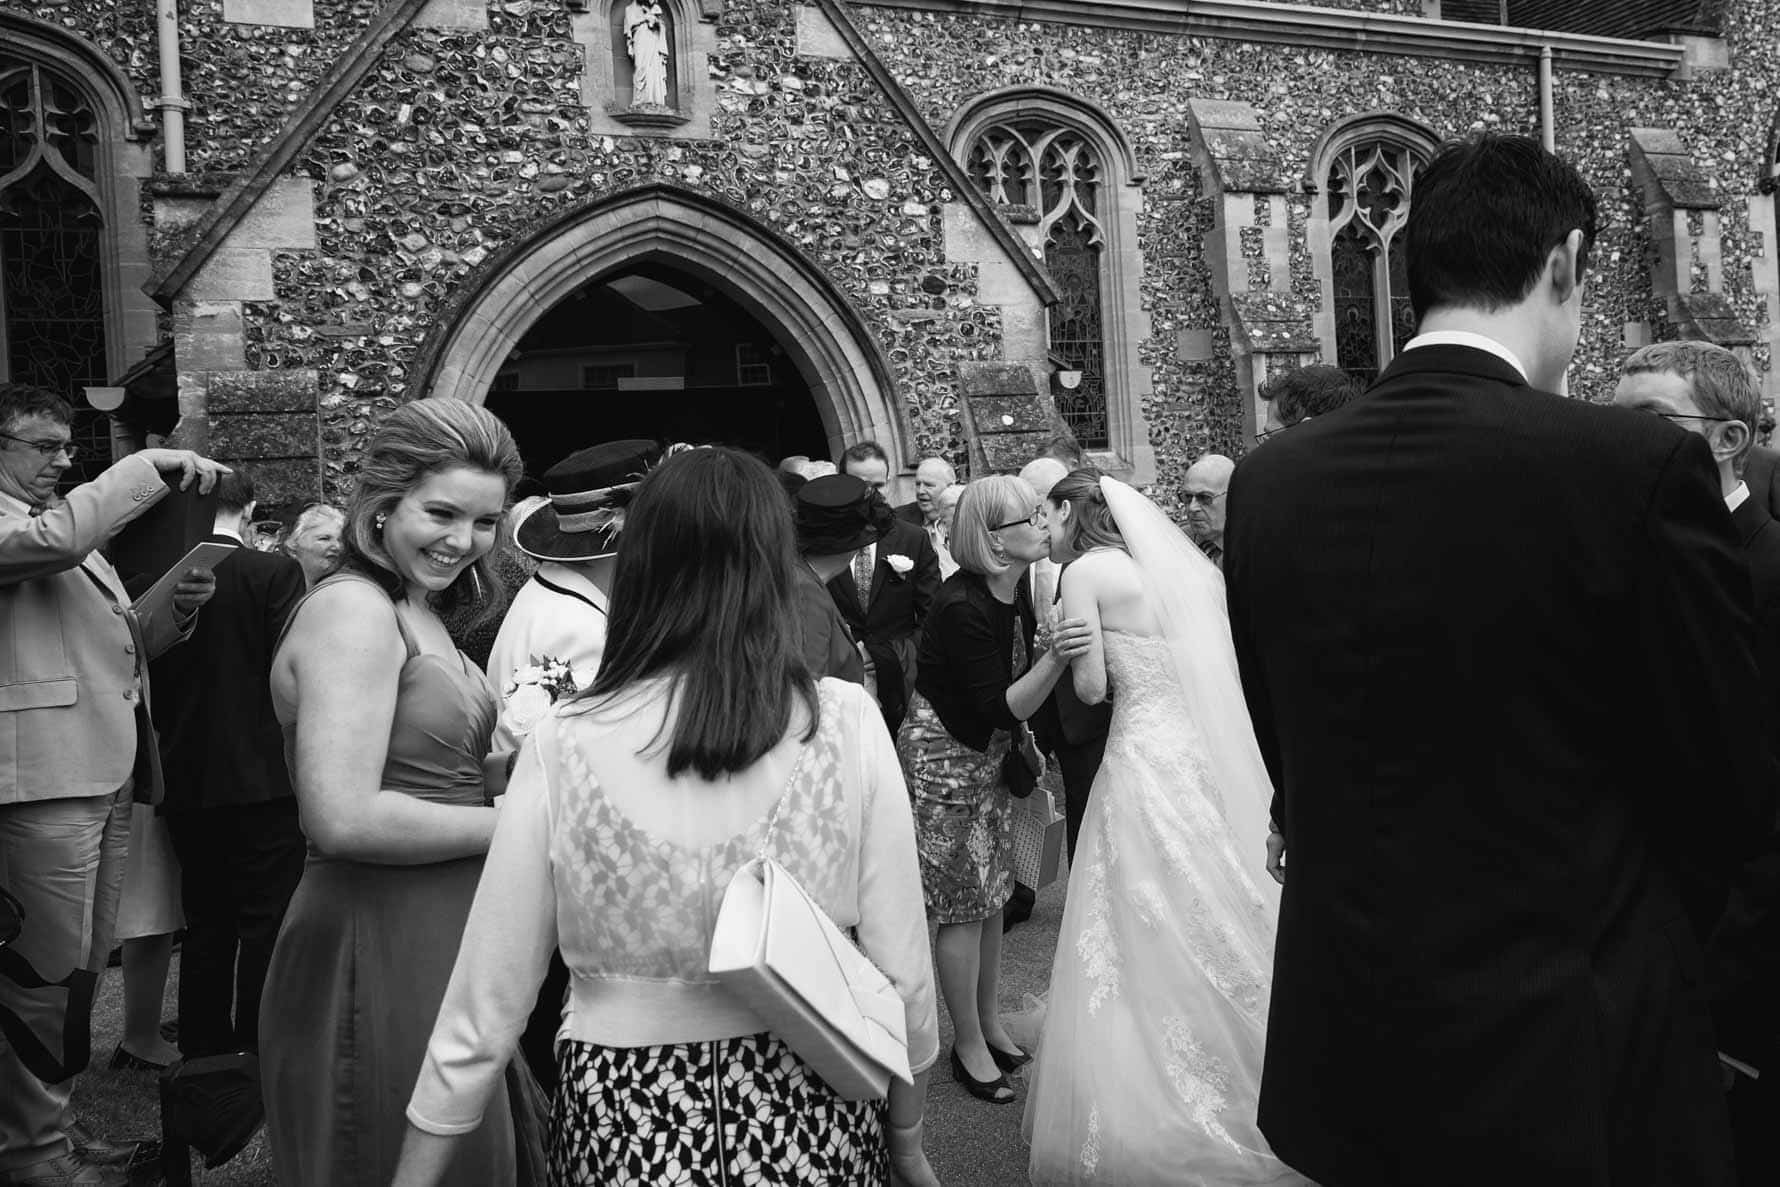 Happy guests after the wedding at St Mary's Church in Hertfordshire